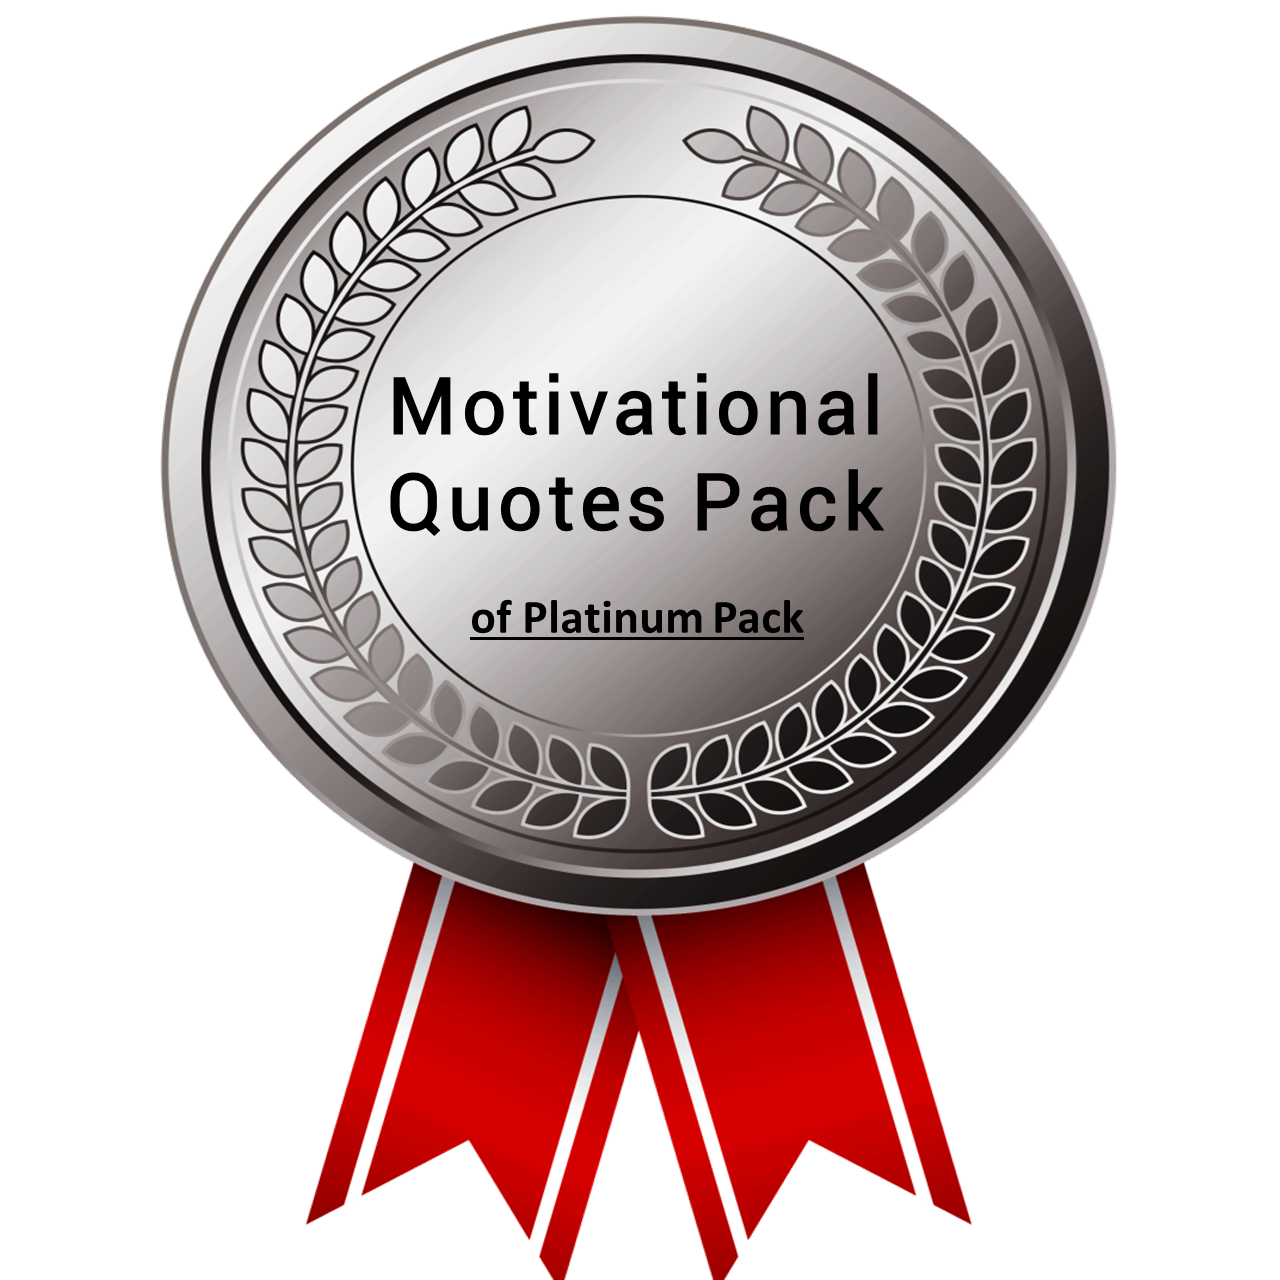 Motivational Quotes Pack - Platinum Pack - Ready made soft skills training ppt